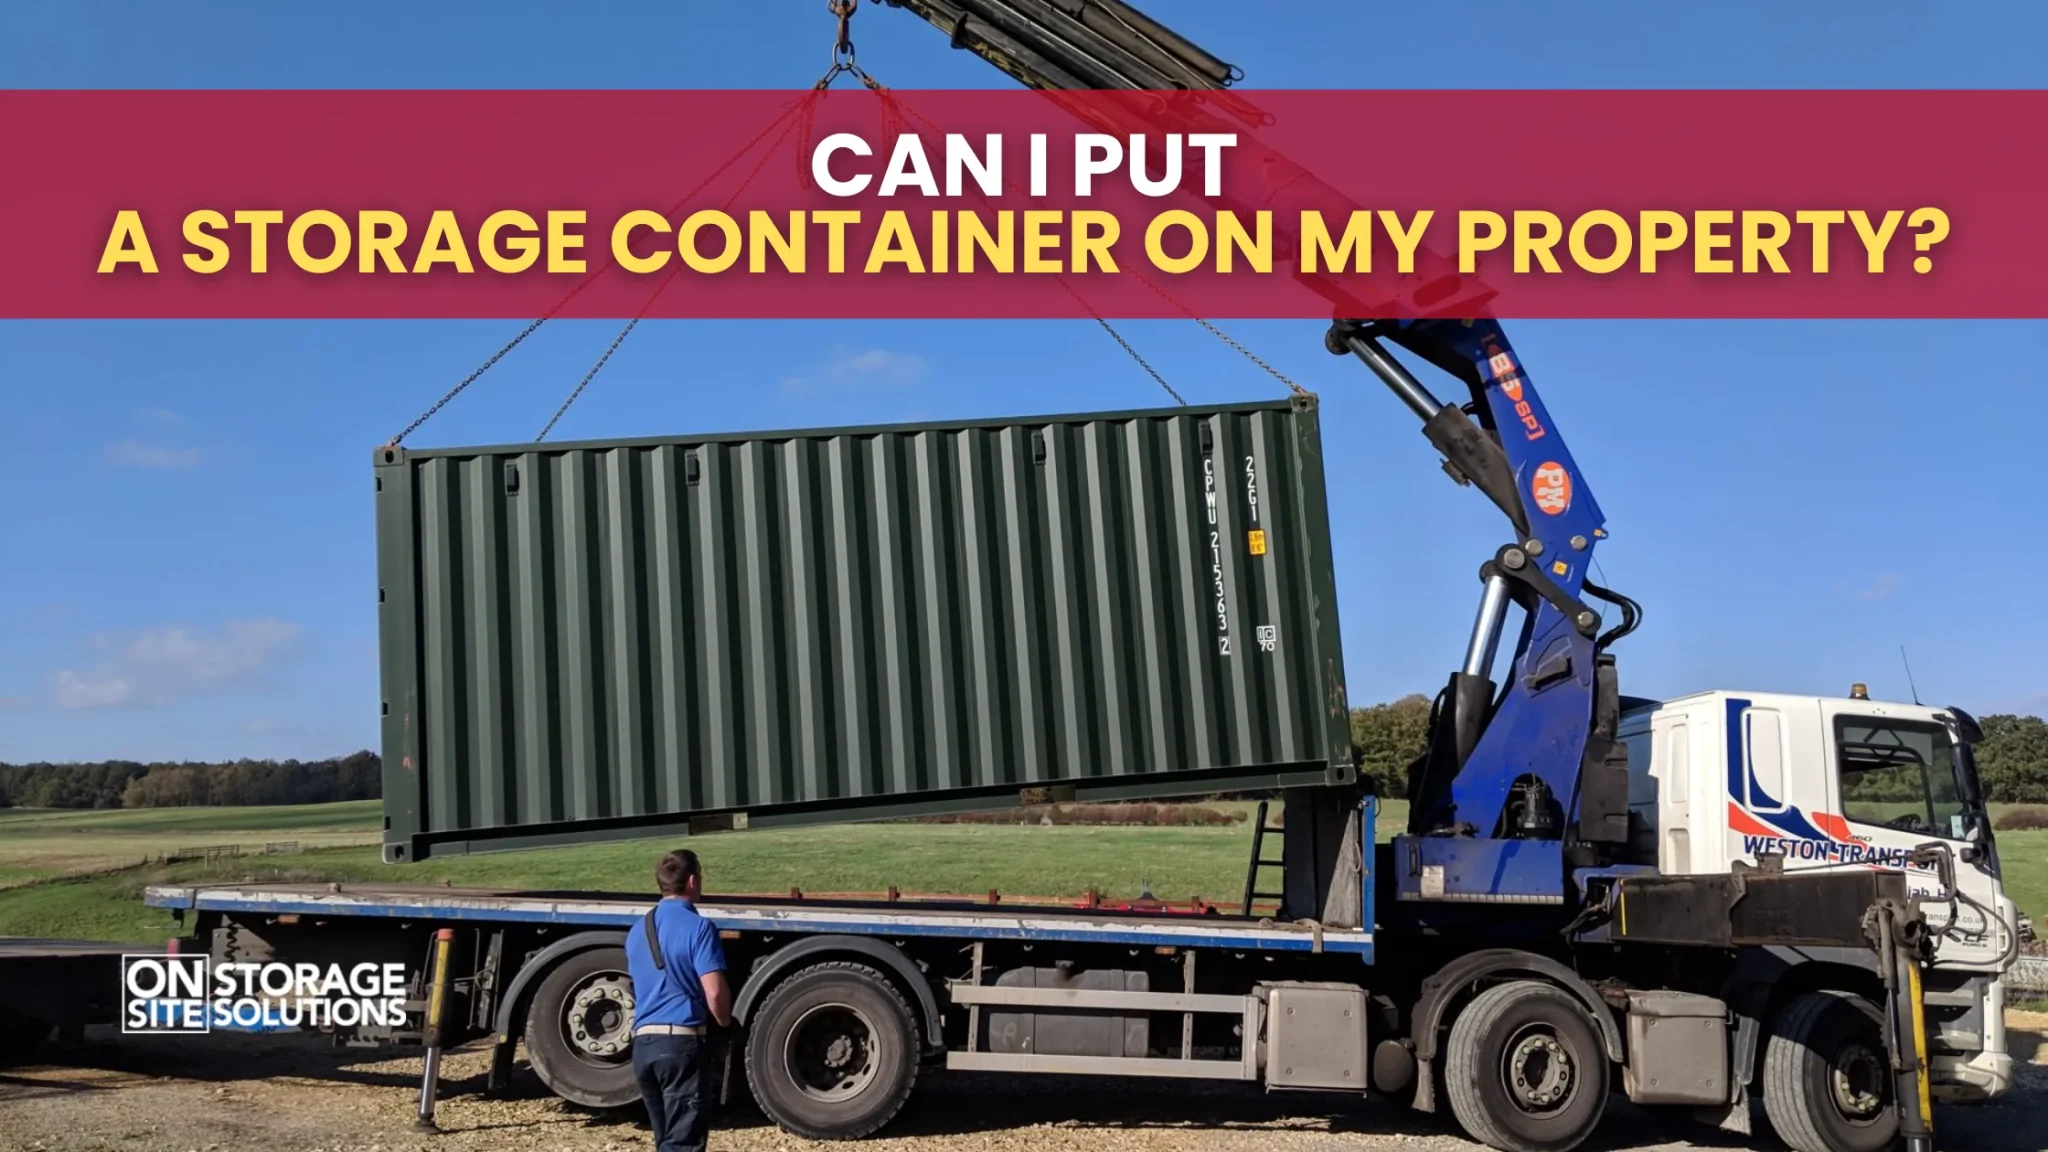 Can I Put a Storage Container on My Property?